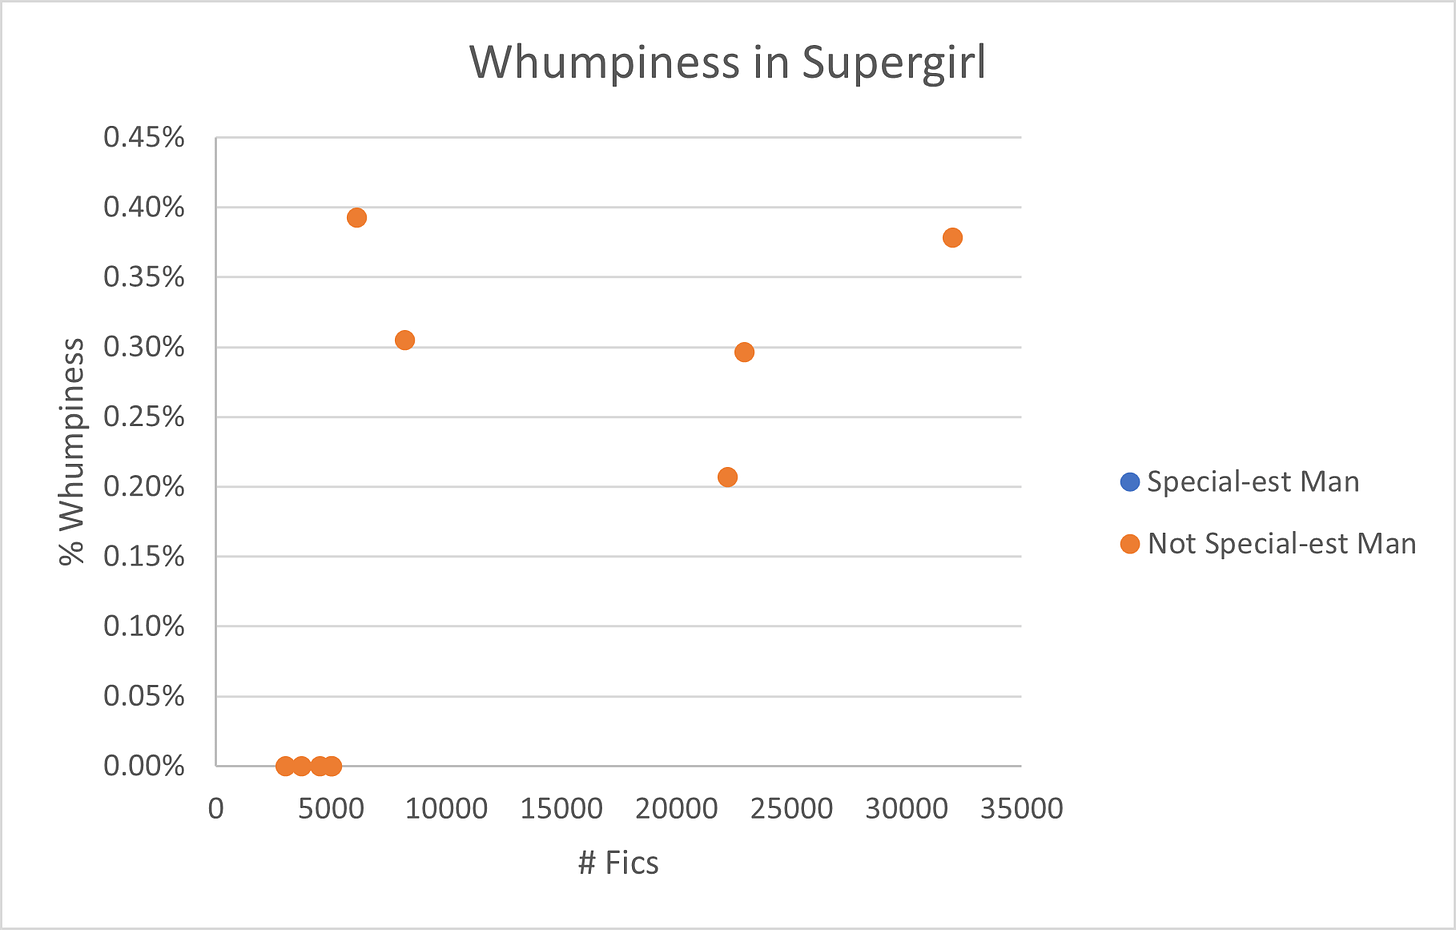 A scatterplot labeled Whumpiness in Supergirl with # Fics on the x axis and % Whumpiness on the y axis. The graph has nine orange dots. The five with the highest numbers of fics are all between .2% and .4% whumpiness, with no discernable pattern.